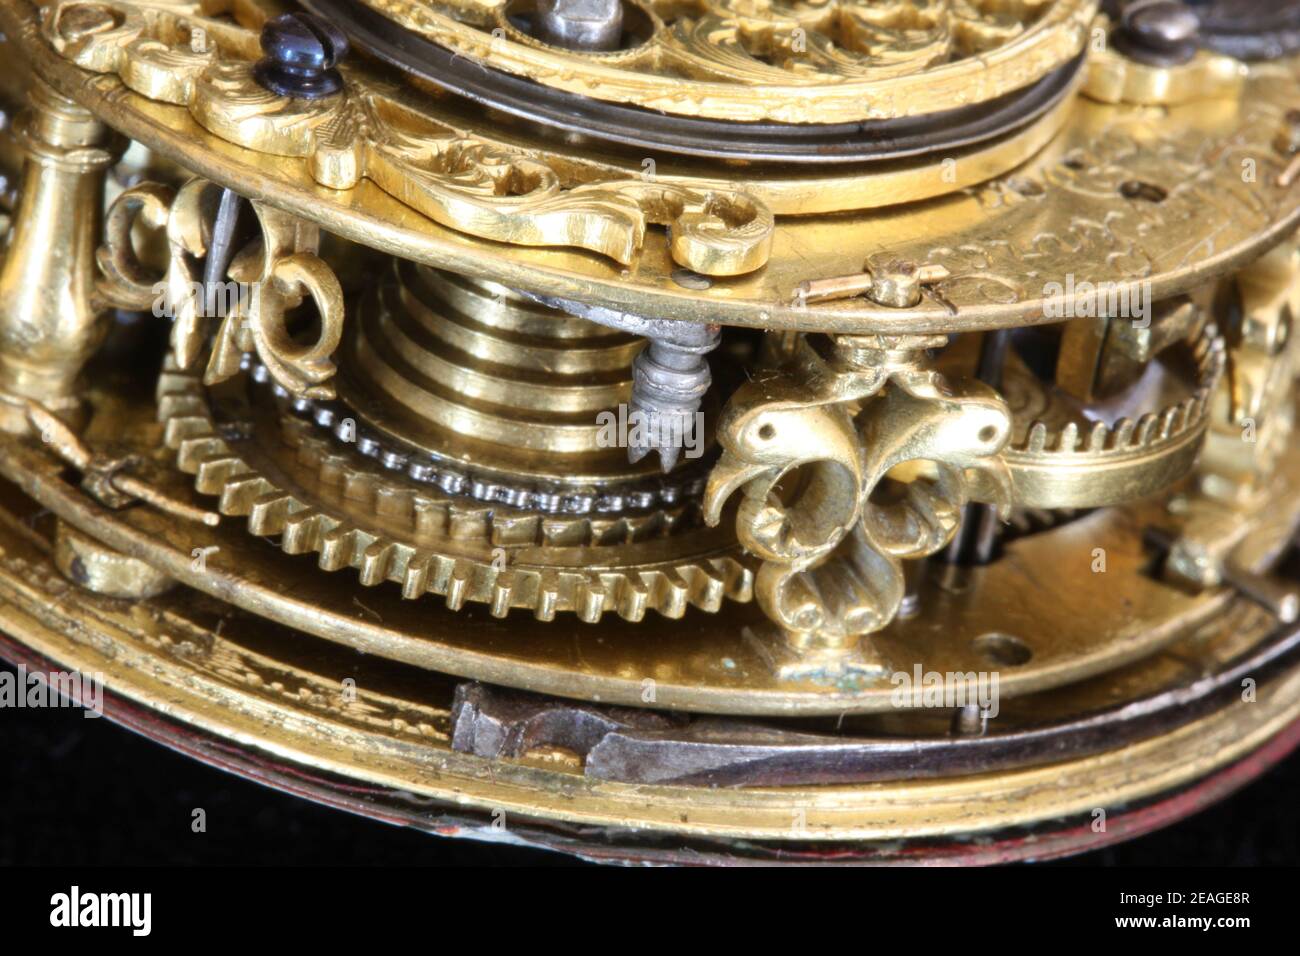 Antique Pocket watch made by James Marwick of London approx 1690 macro image of the chiming verge movement Stock Photo